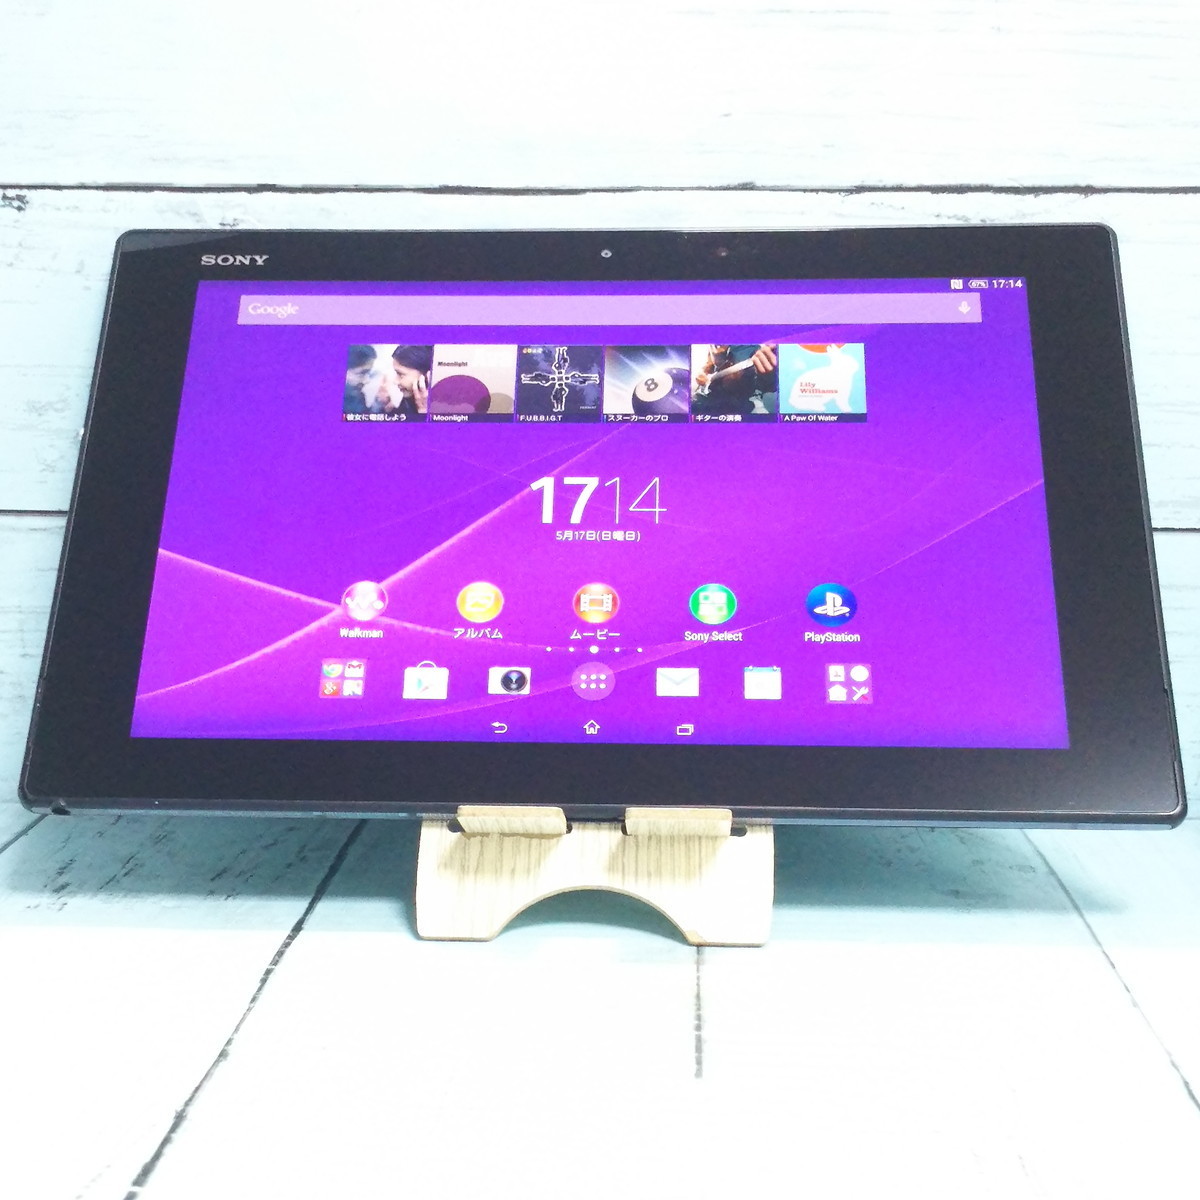 SONY Xperia Z2 Android Tablet Wi-Fi SGP512 本体 483340